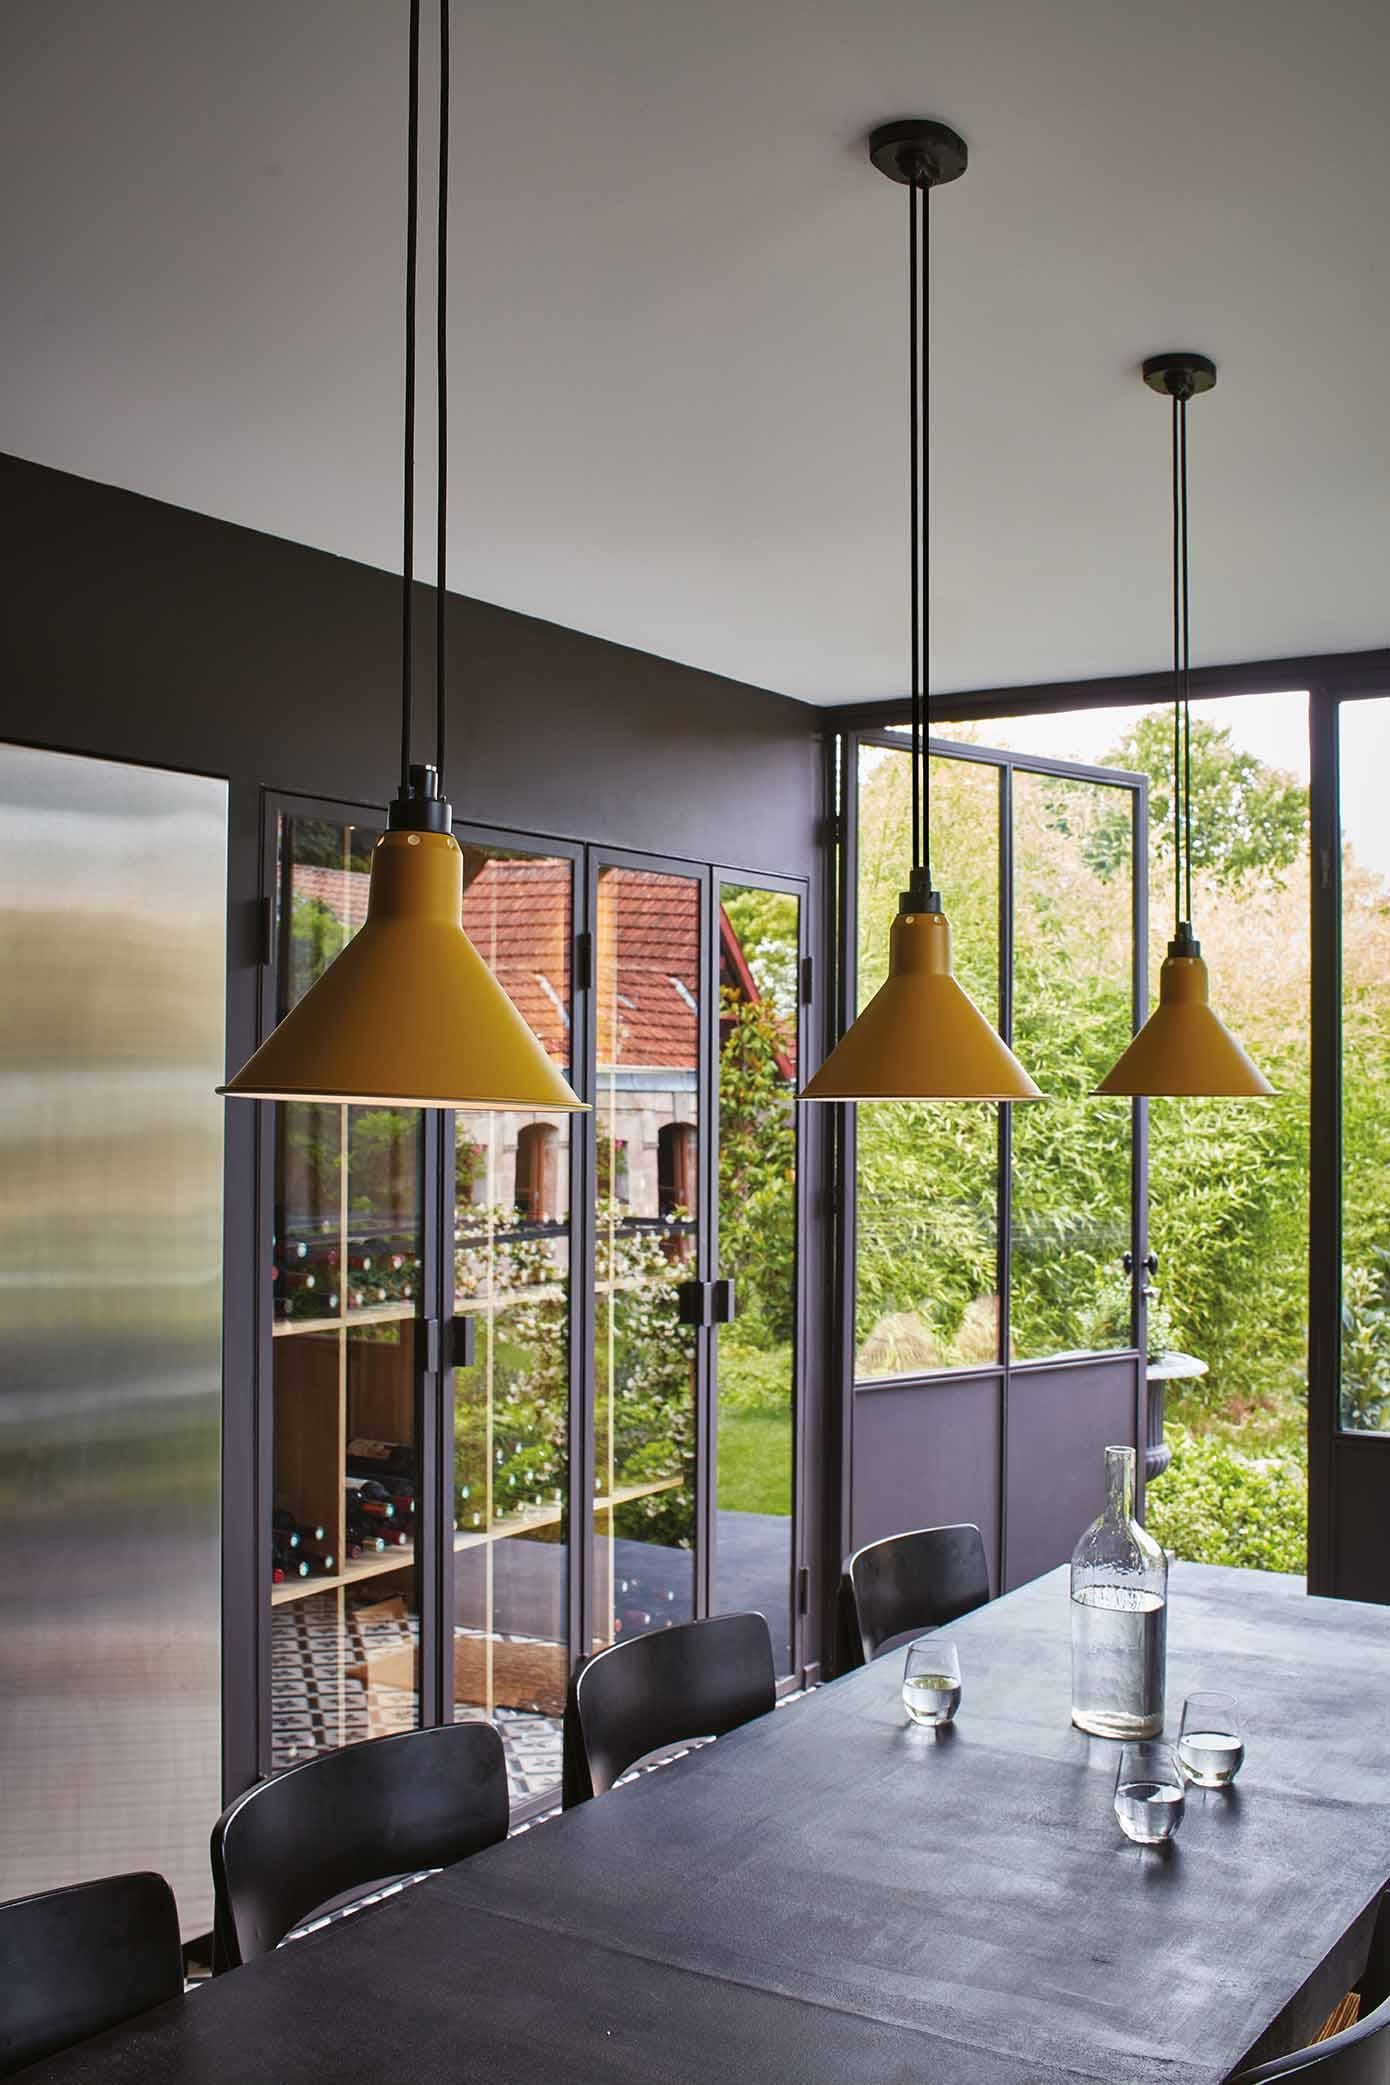 Steel DCW Editions Les Acrobates N°322 Large Conic Pendant Lamp in Raw Copper Shade For Sale